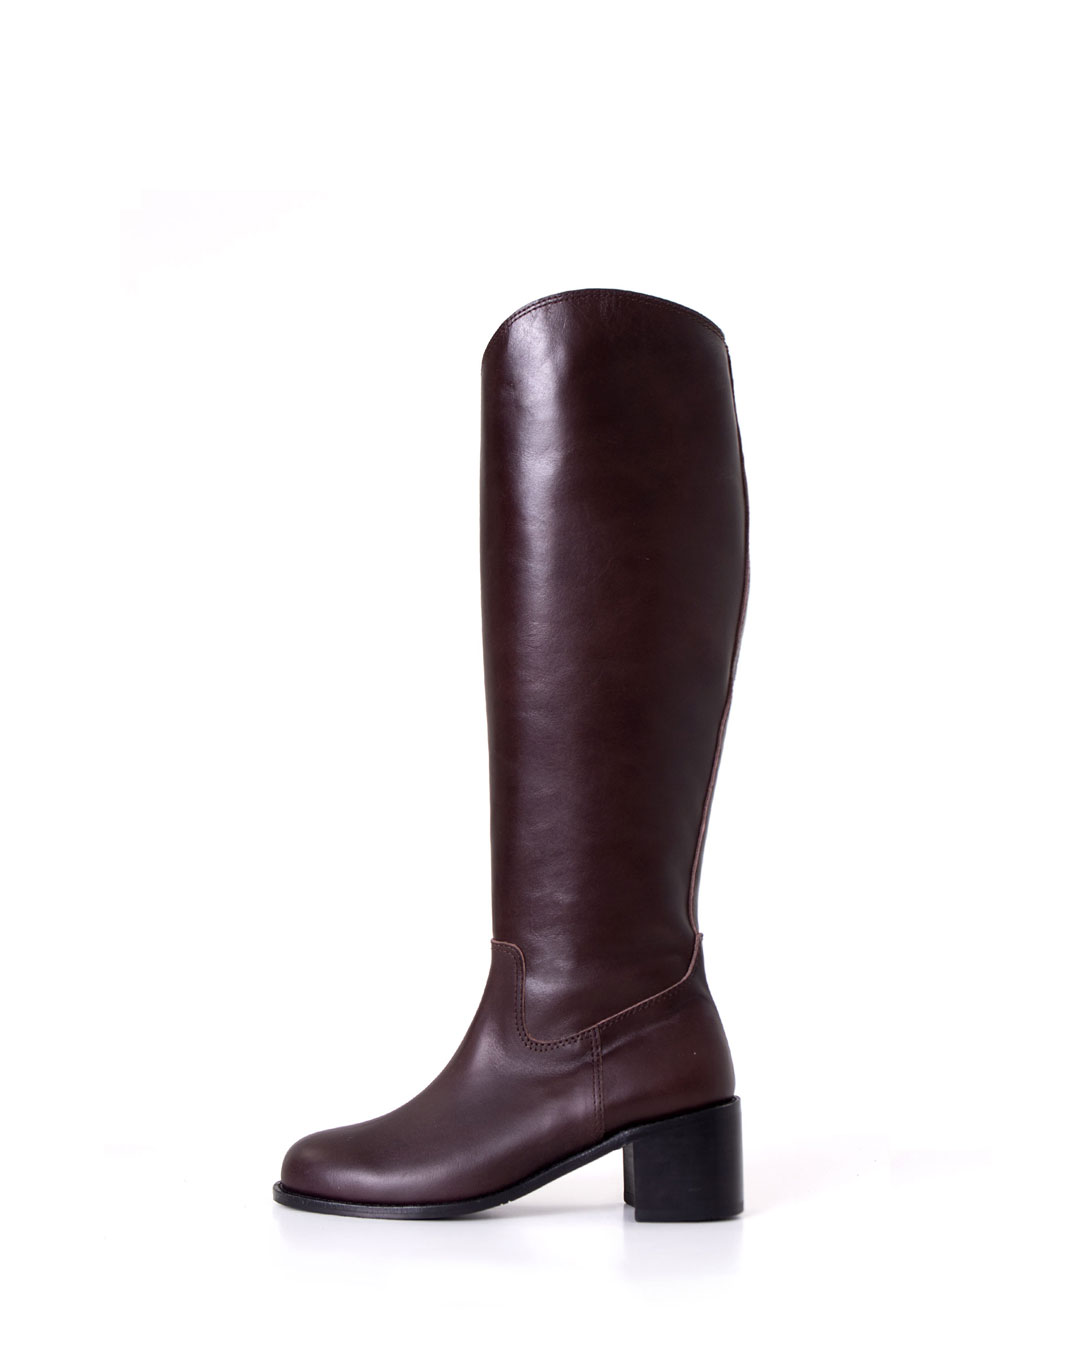 Essential Boots - BROWN